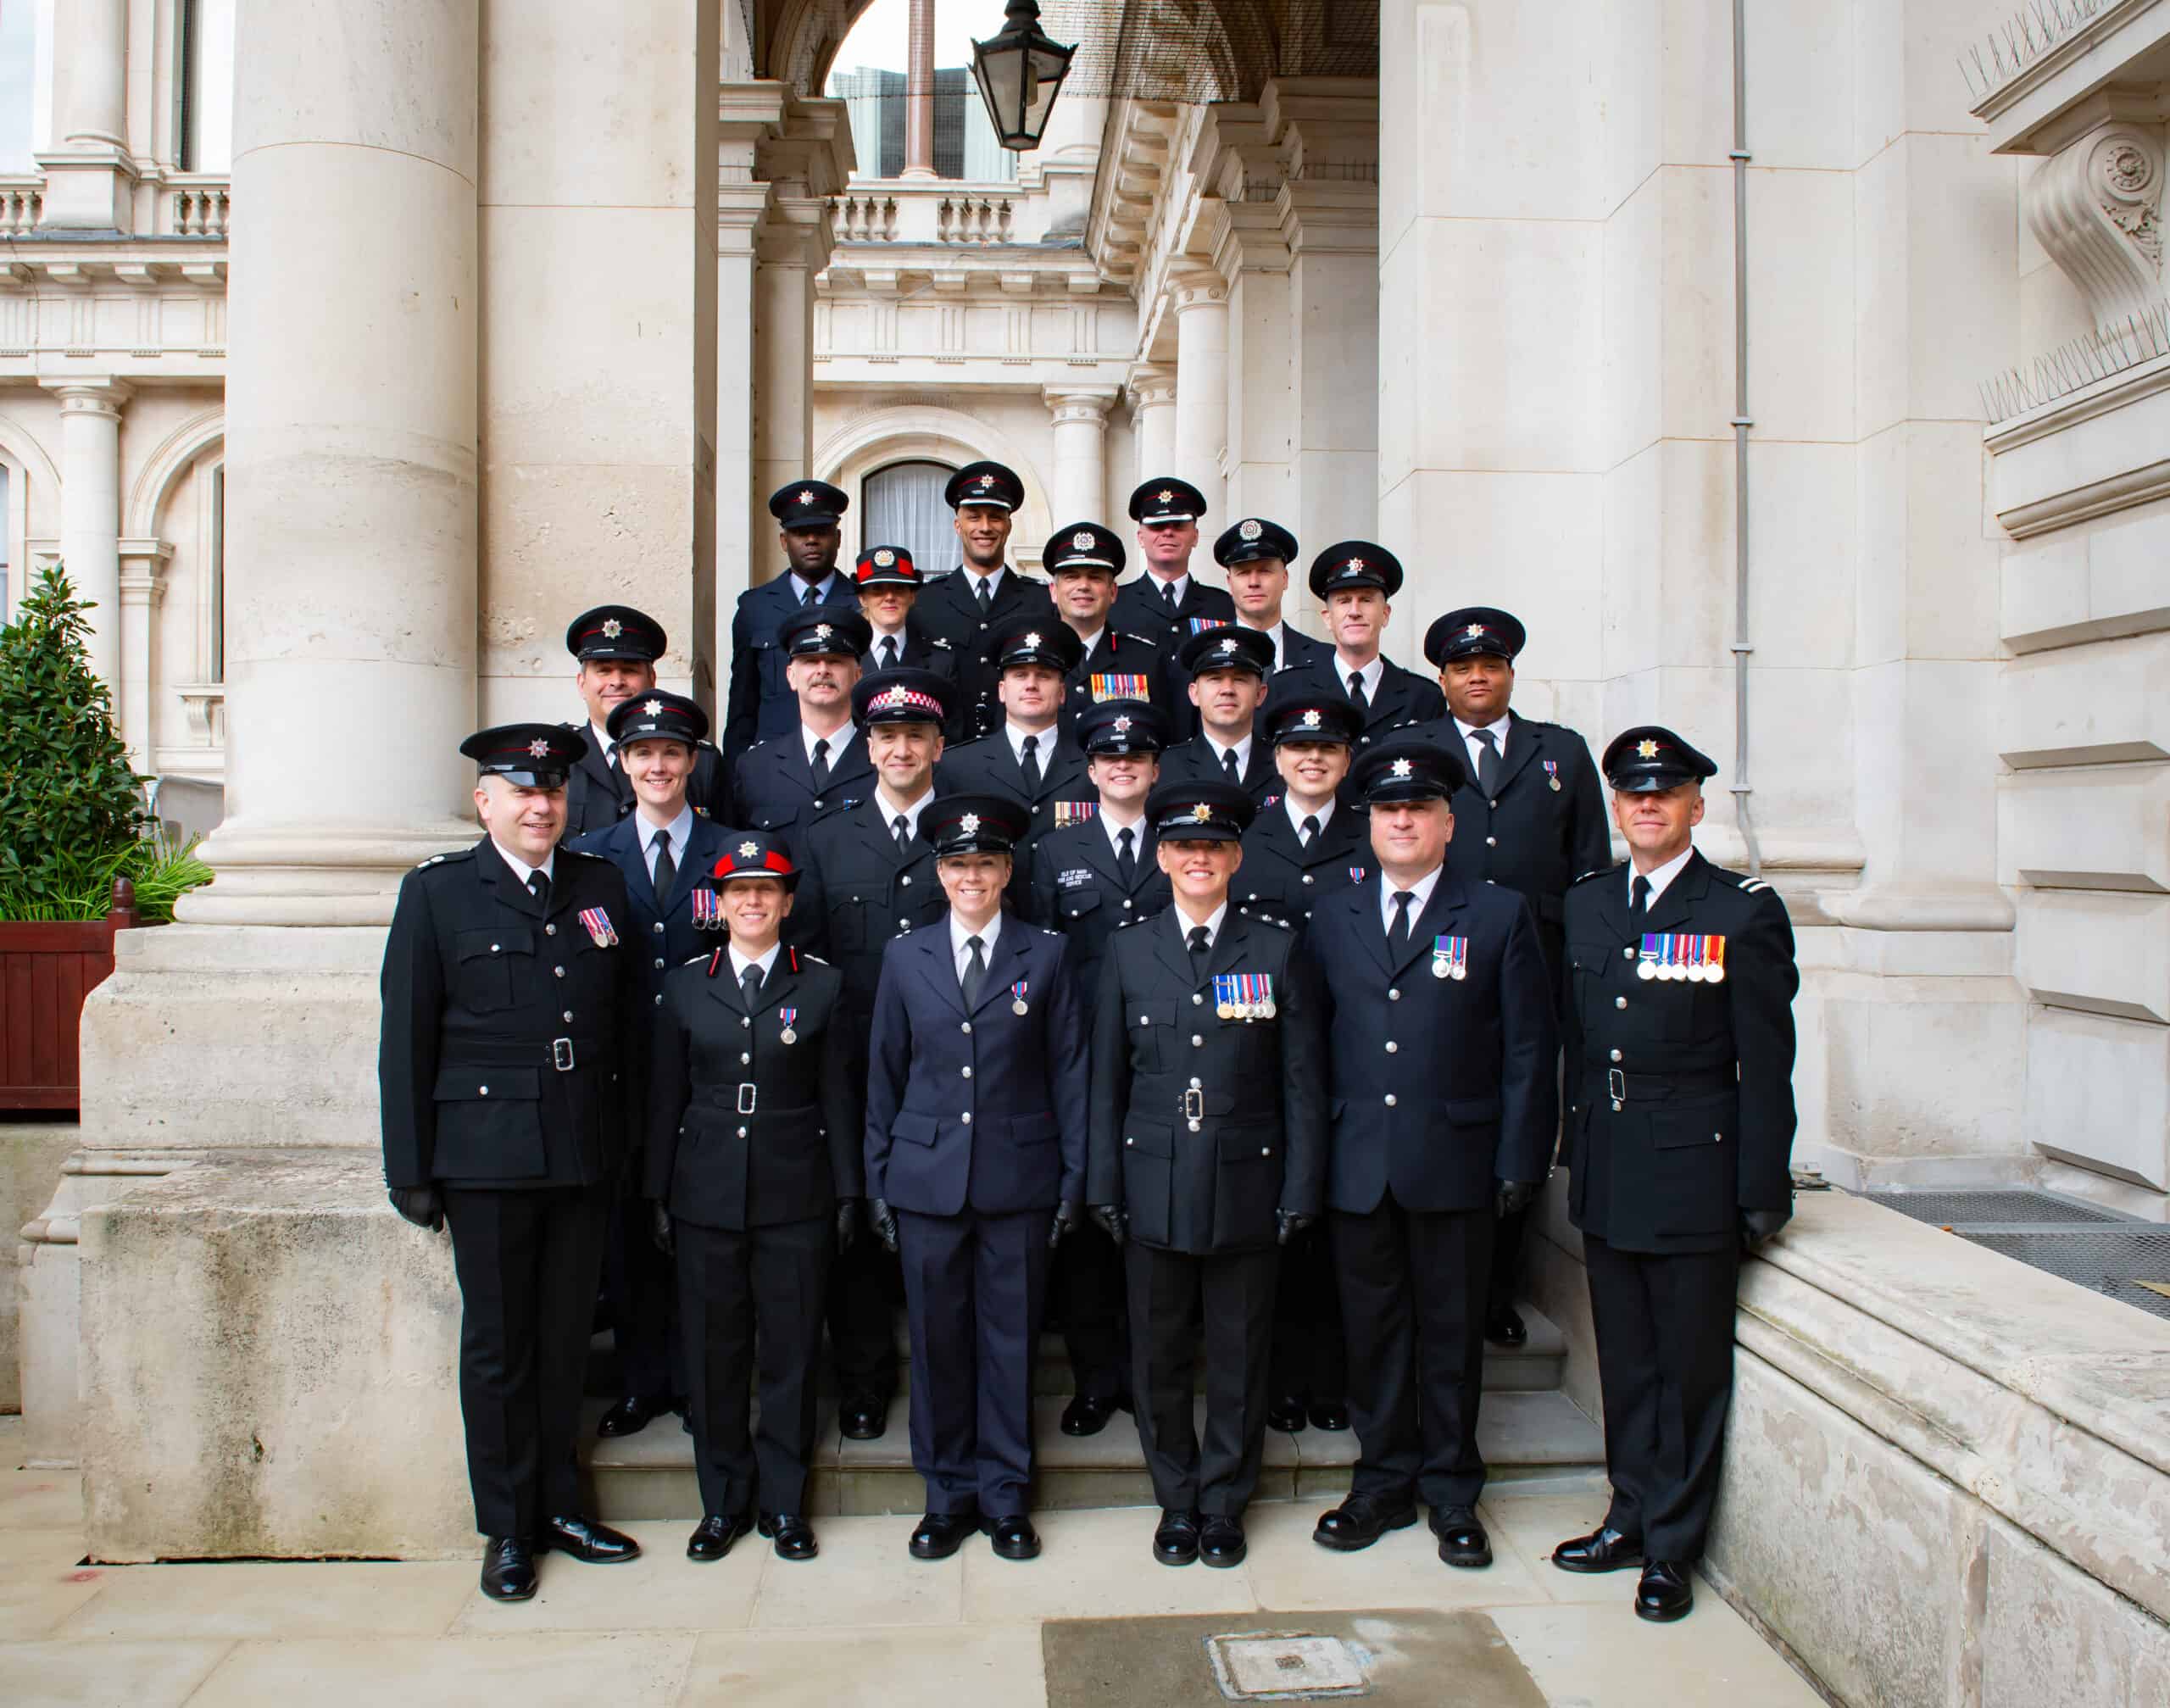 Group of representatives of Fire and Rescue Services from across the UK